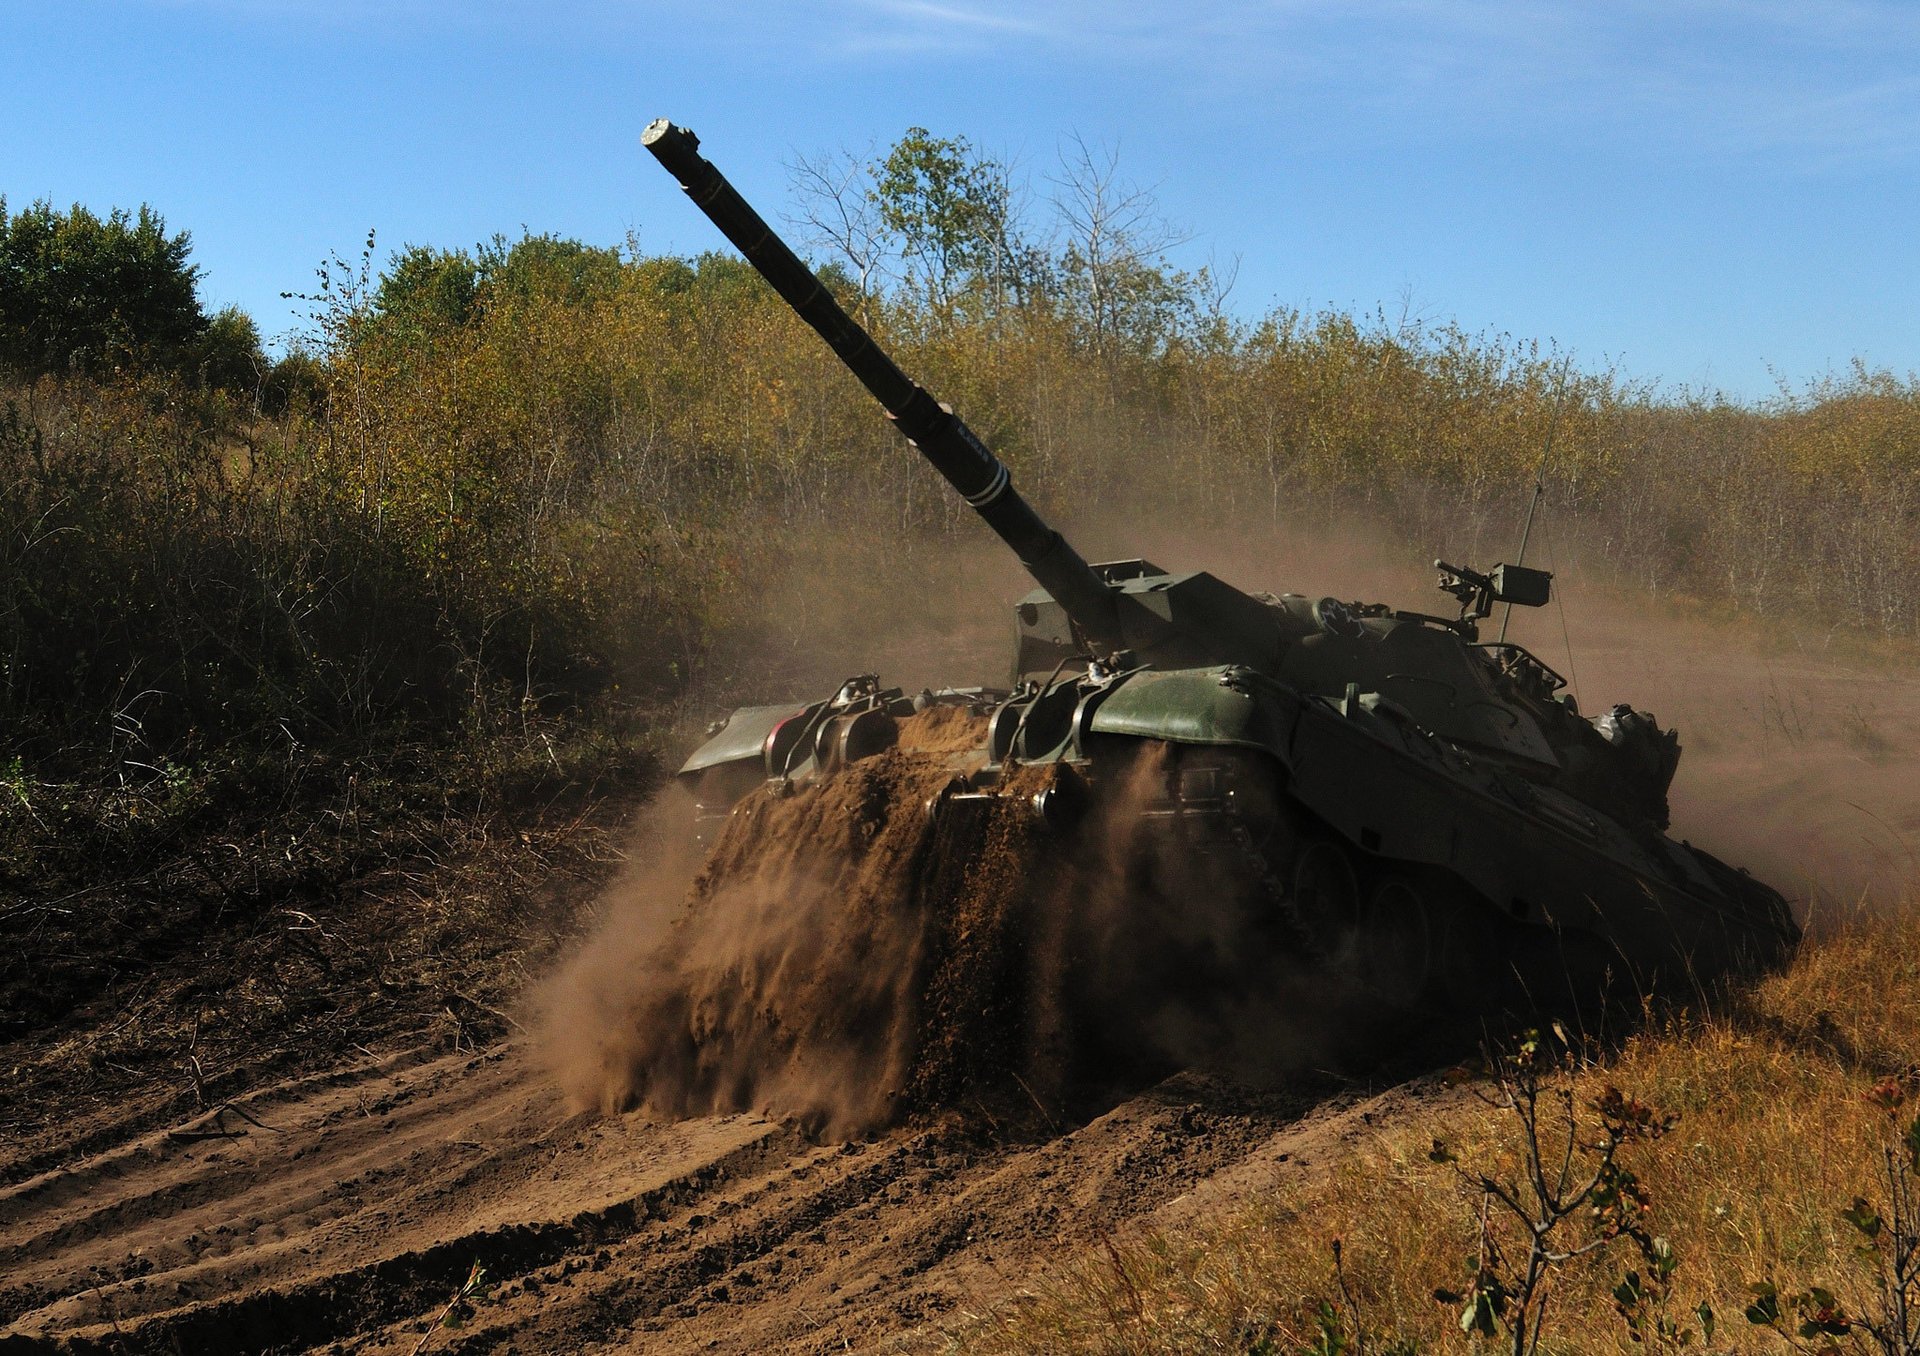 A battle tank moves across the sand